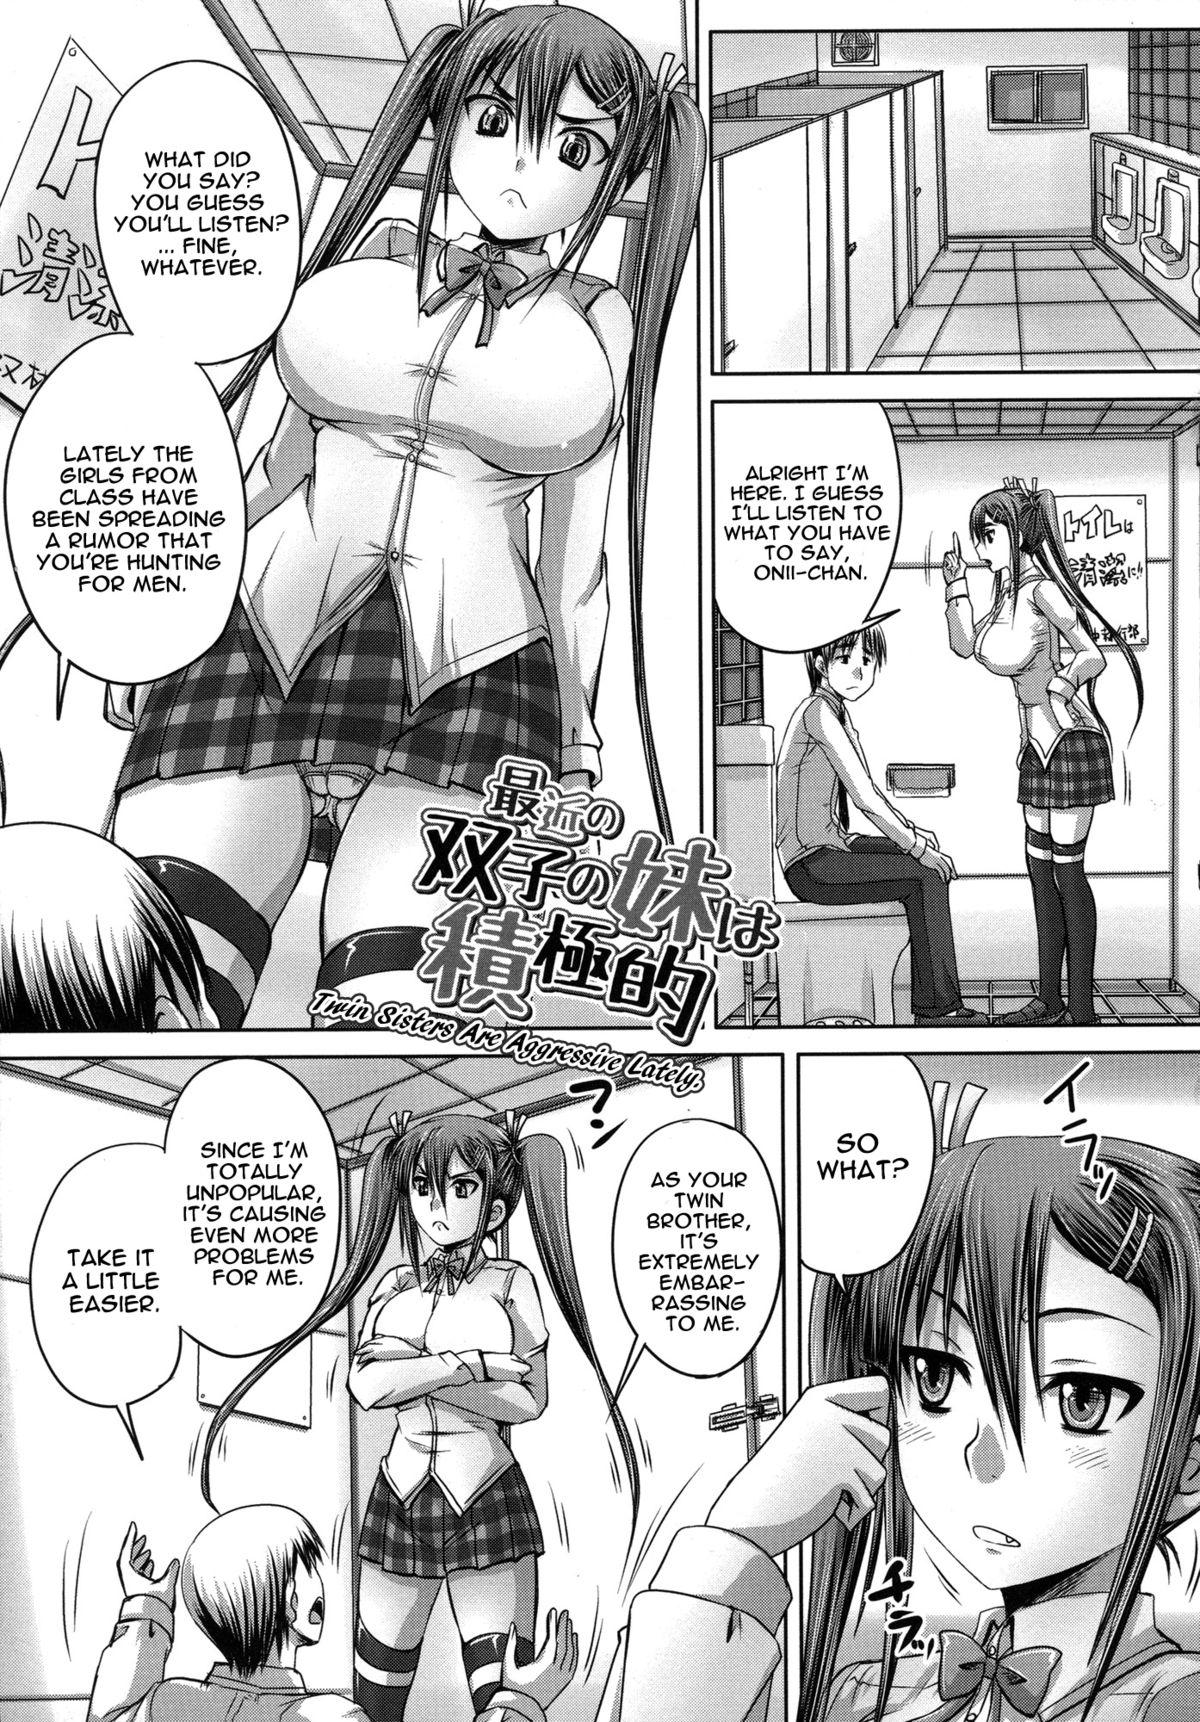 [Akigami Satoru] Tsukurou! Onaho Ane - Let's made a Sex Sleeve from Sister | Turning My Elder-Sister into a Sex-Sleeve [English] {doujin-moe.us} 89